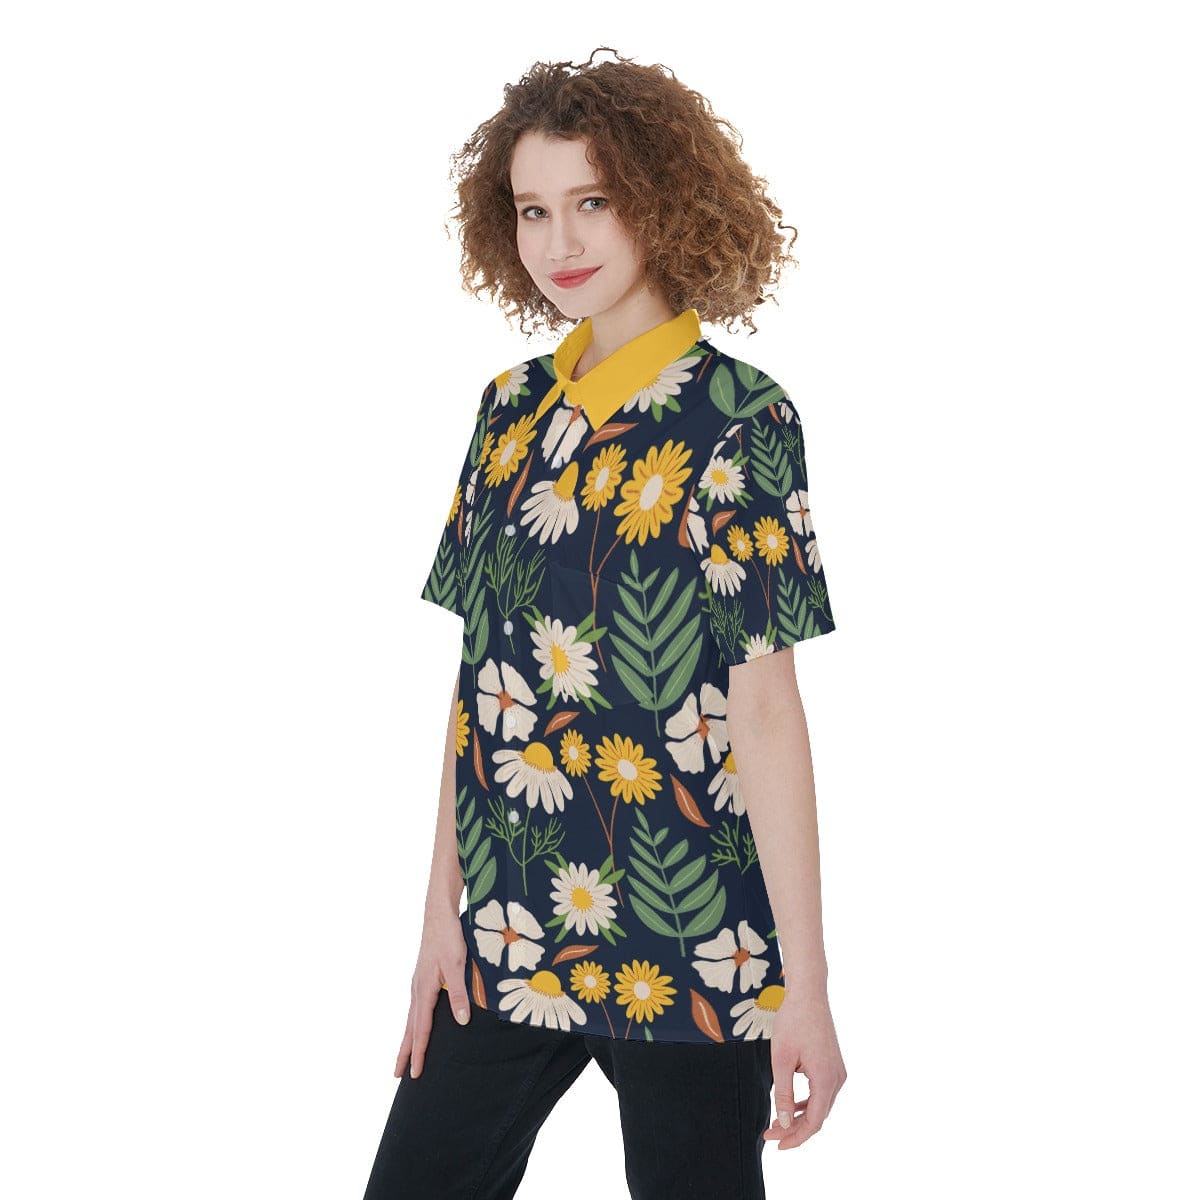 Yoycol All-Over Print Women's Short Sleeve Shirt With Pocket